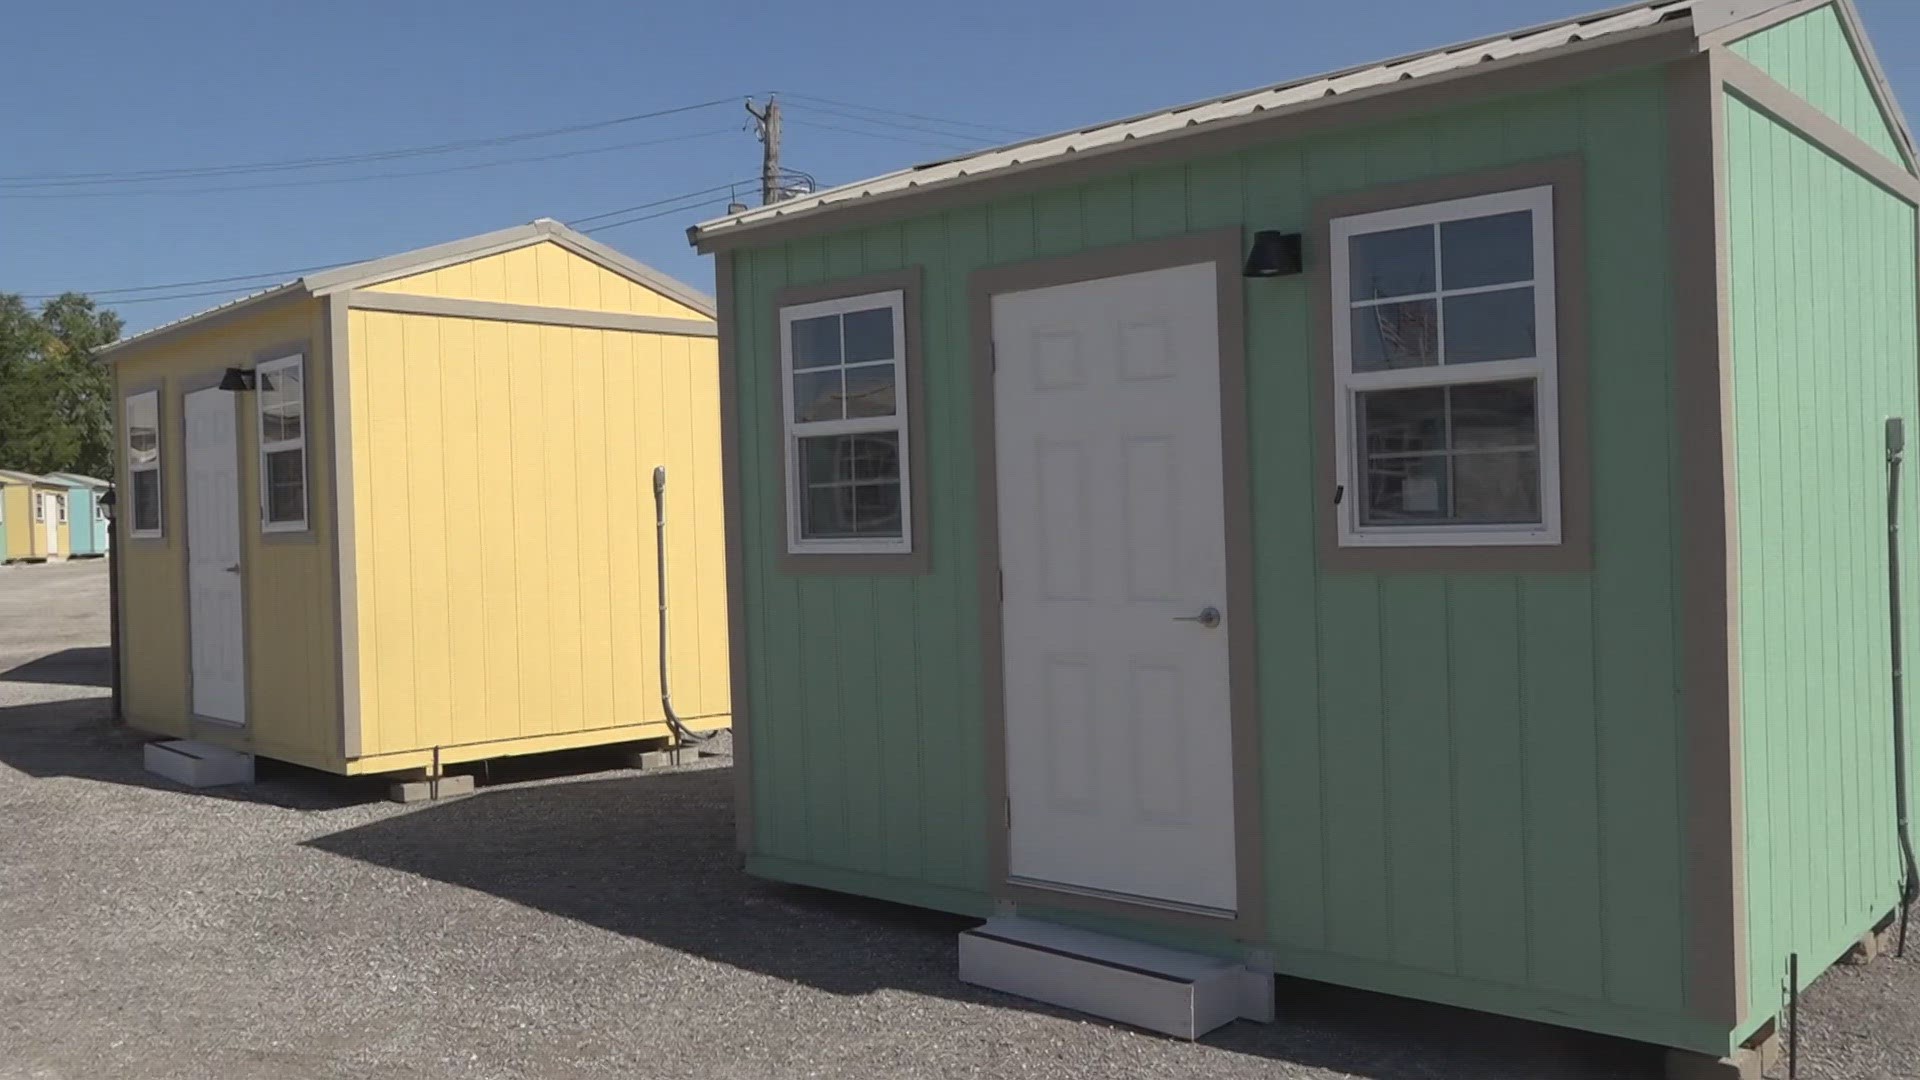 Funded with $1.2 million in American Rescue Plan Act (ARPA) funds, the expansion doubles the number of Tiny Homes to 100. They assist unhoused individuals.